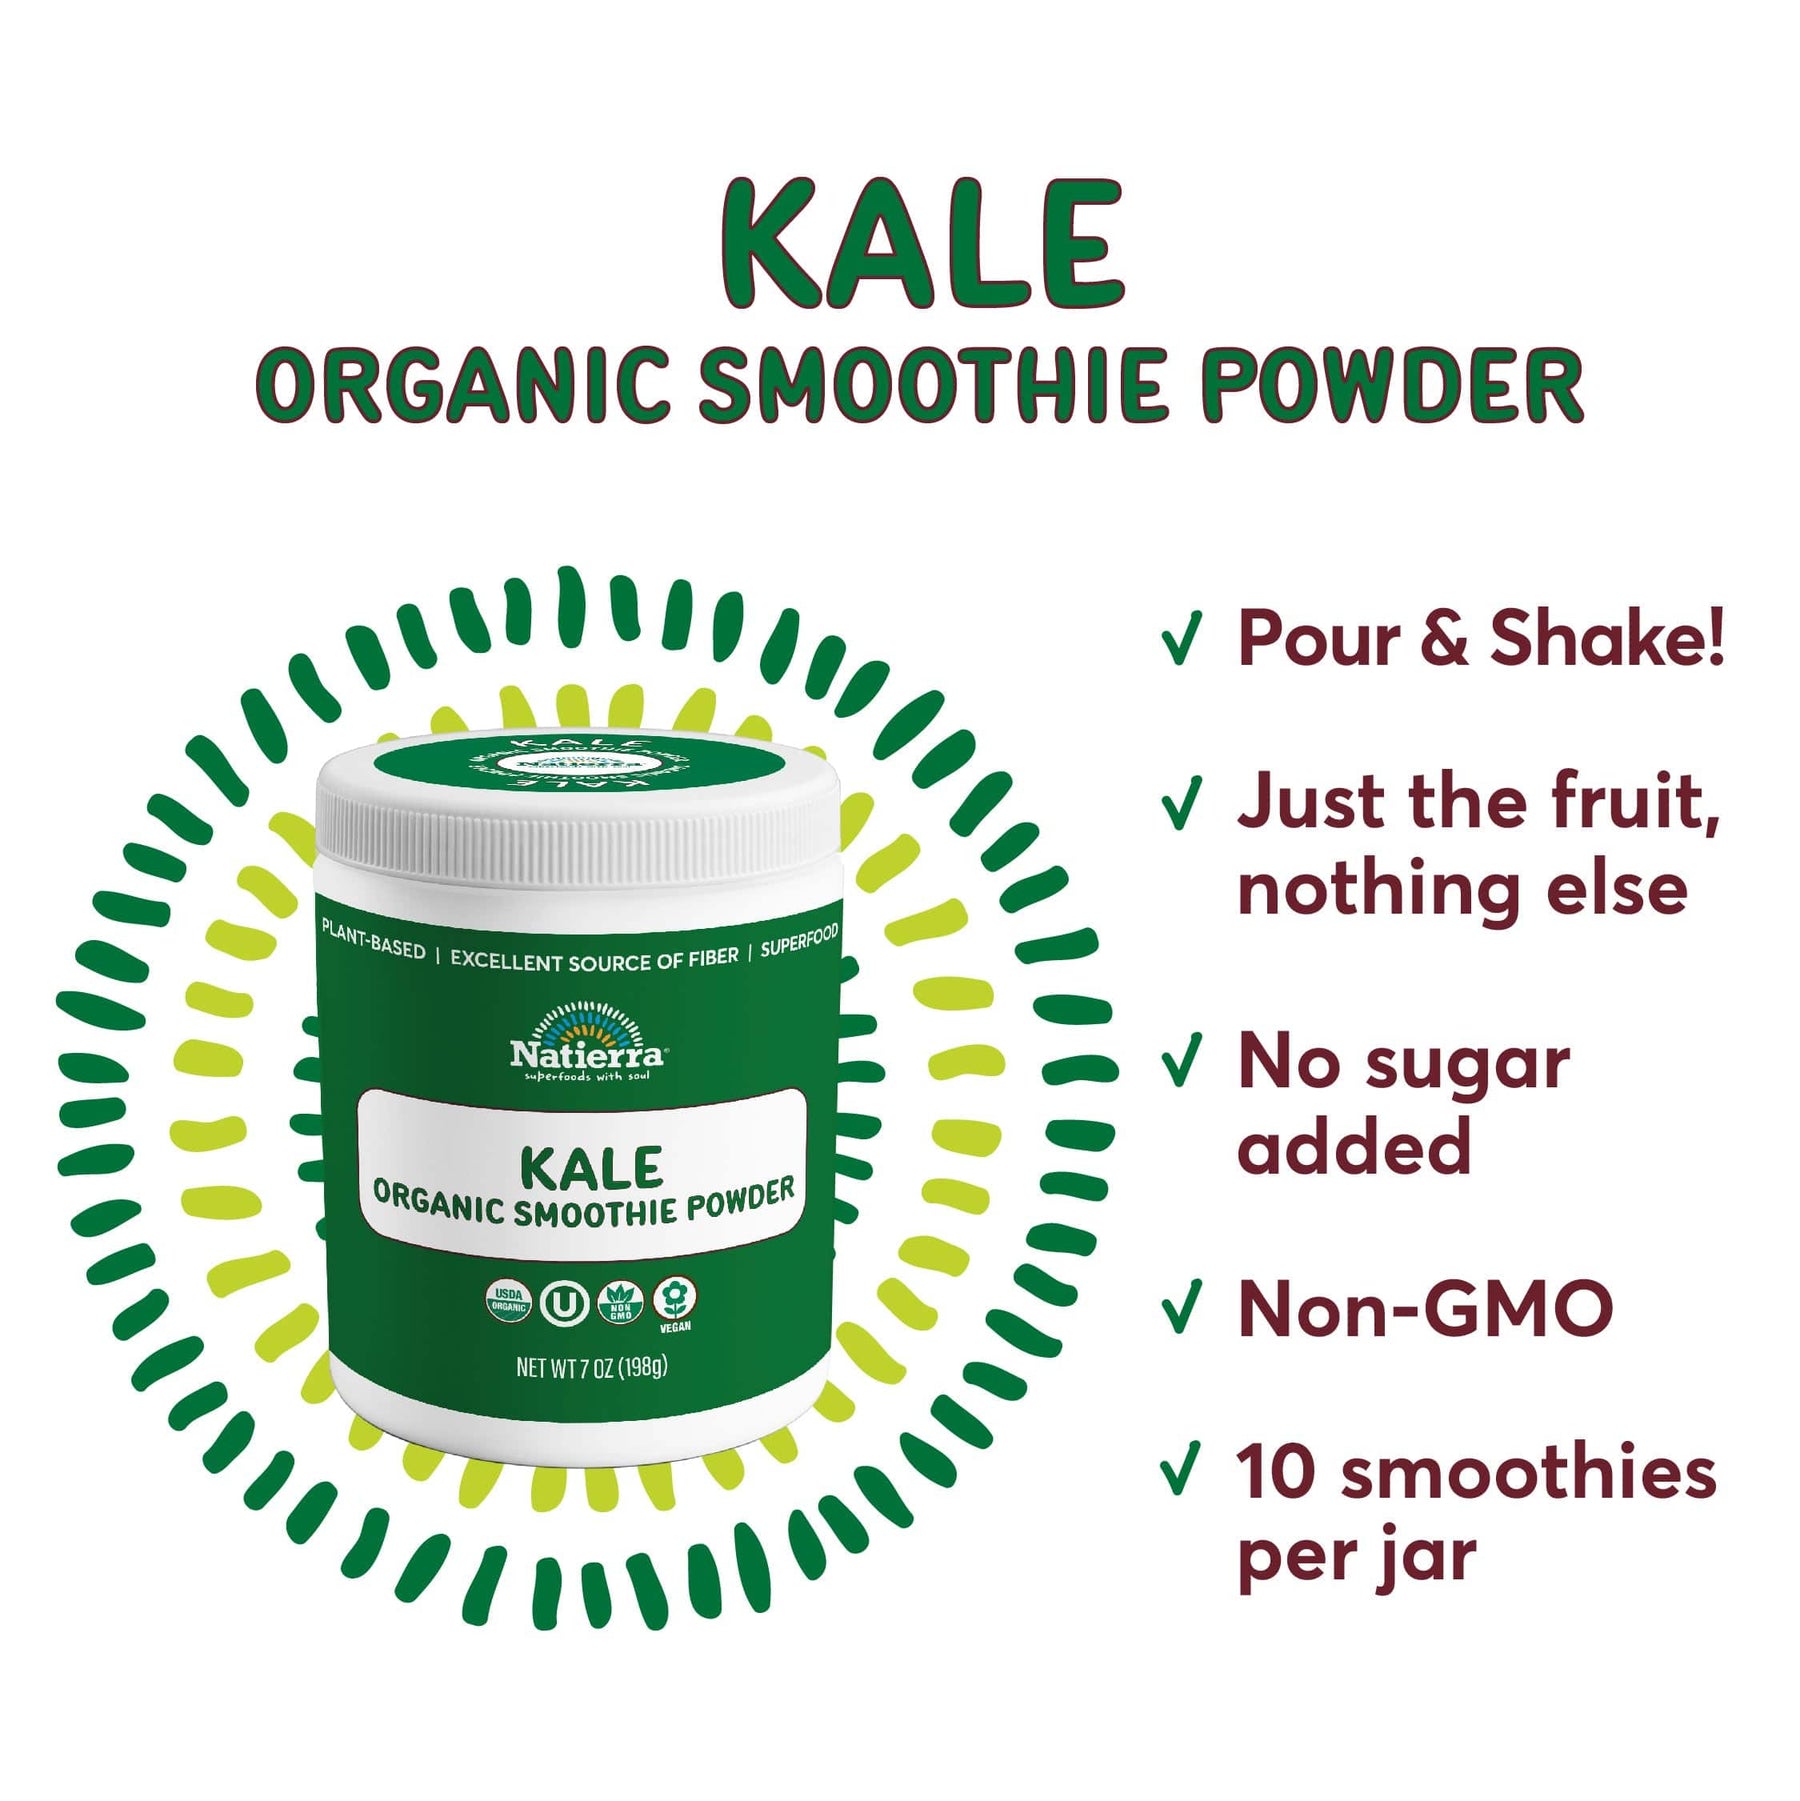 A jar of Natierra Kale Organic Smoothie Powder next to list of main product claims